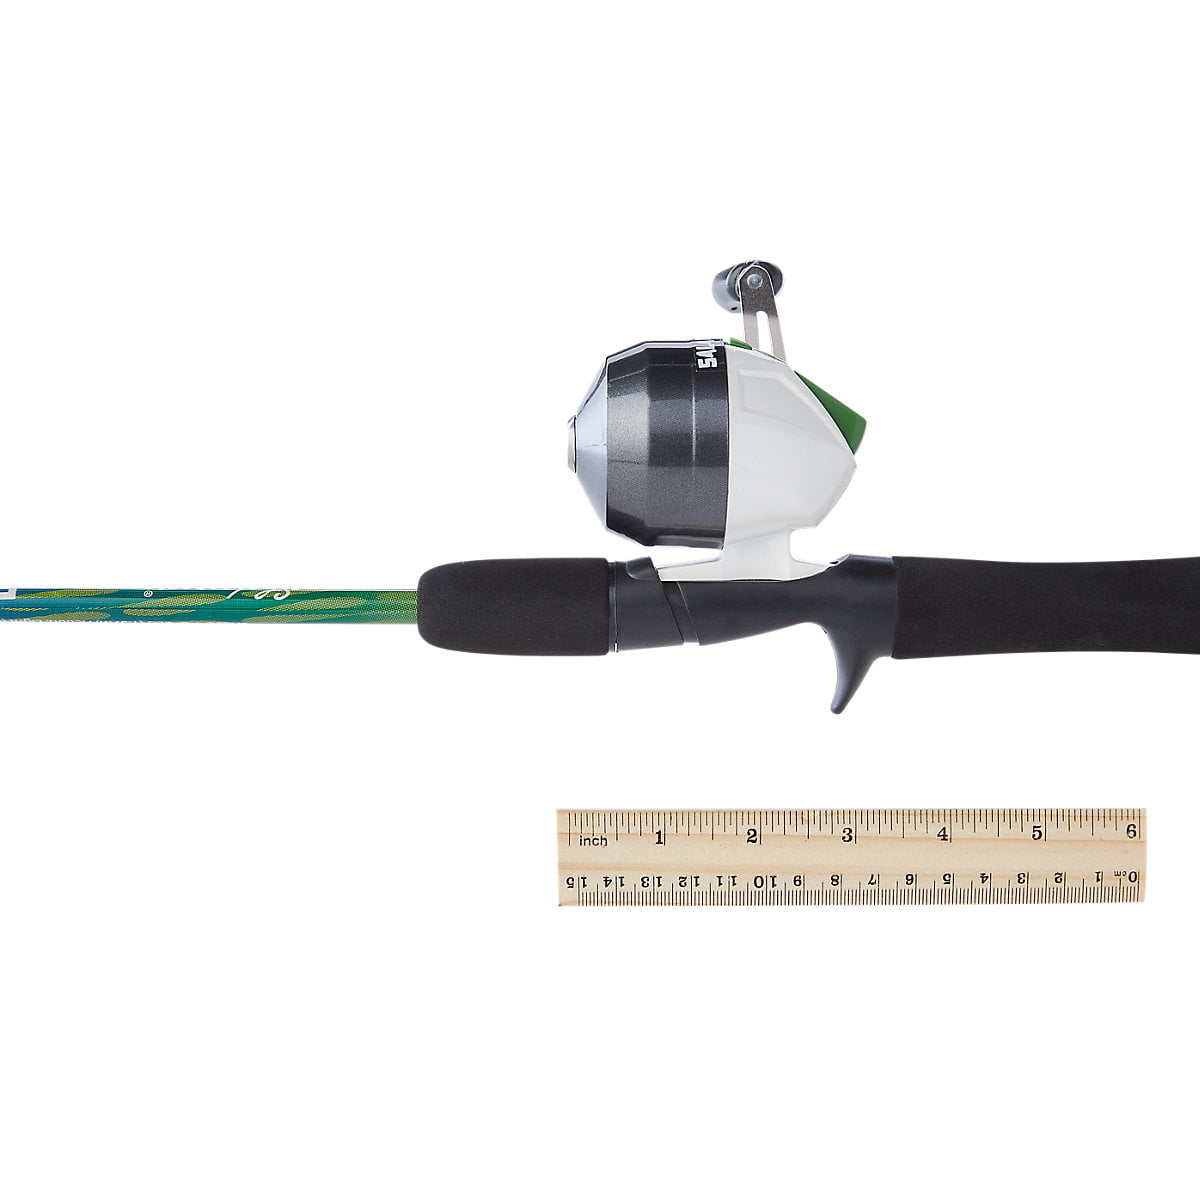 Shakespeare Salamander Spincast Fishing Rod and Reel Combo 